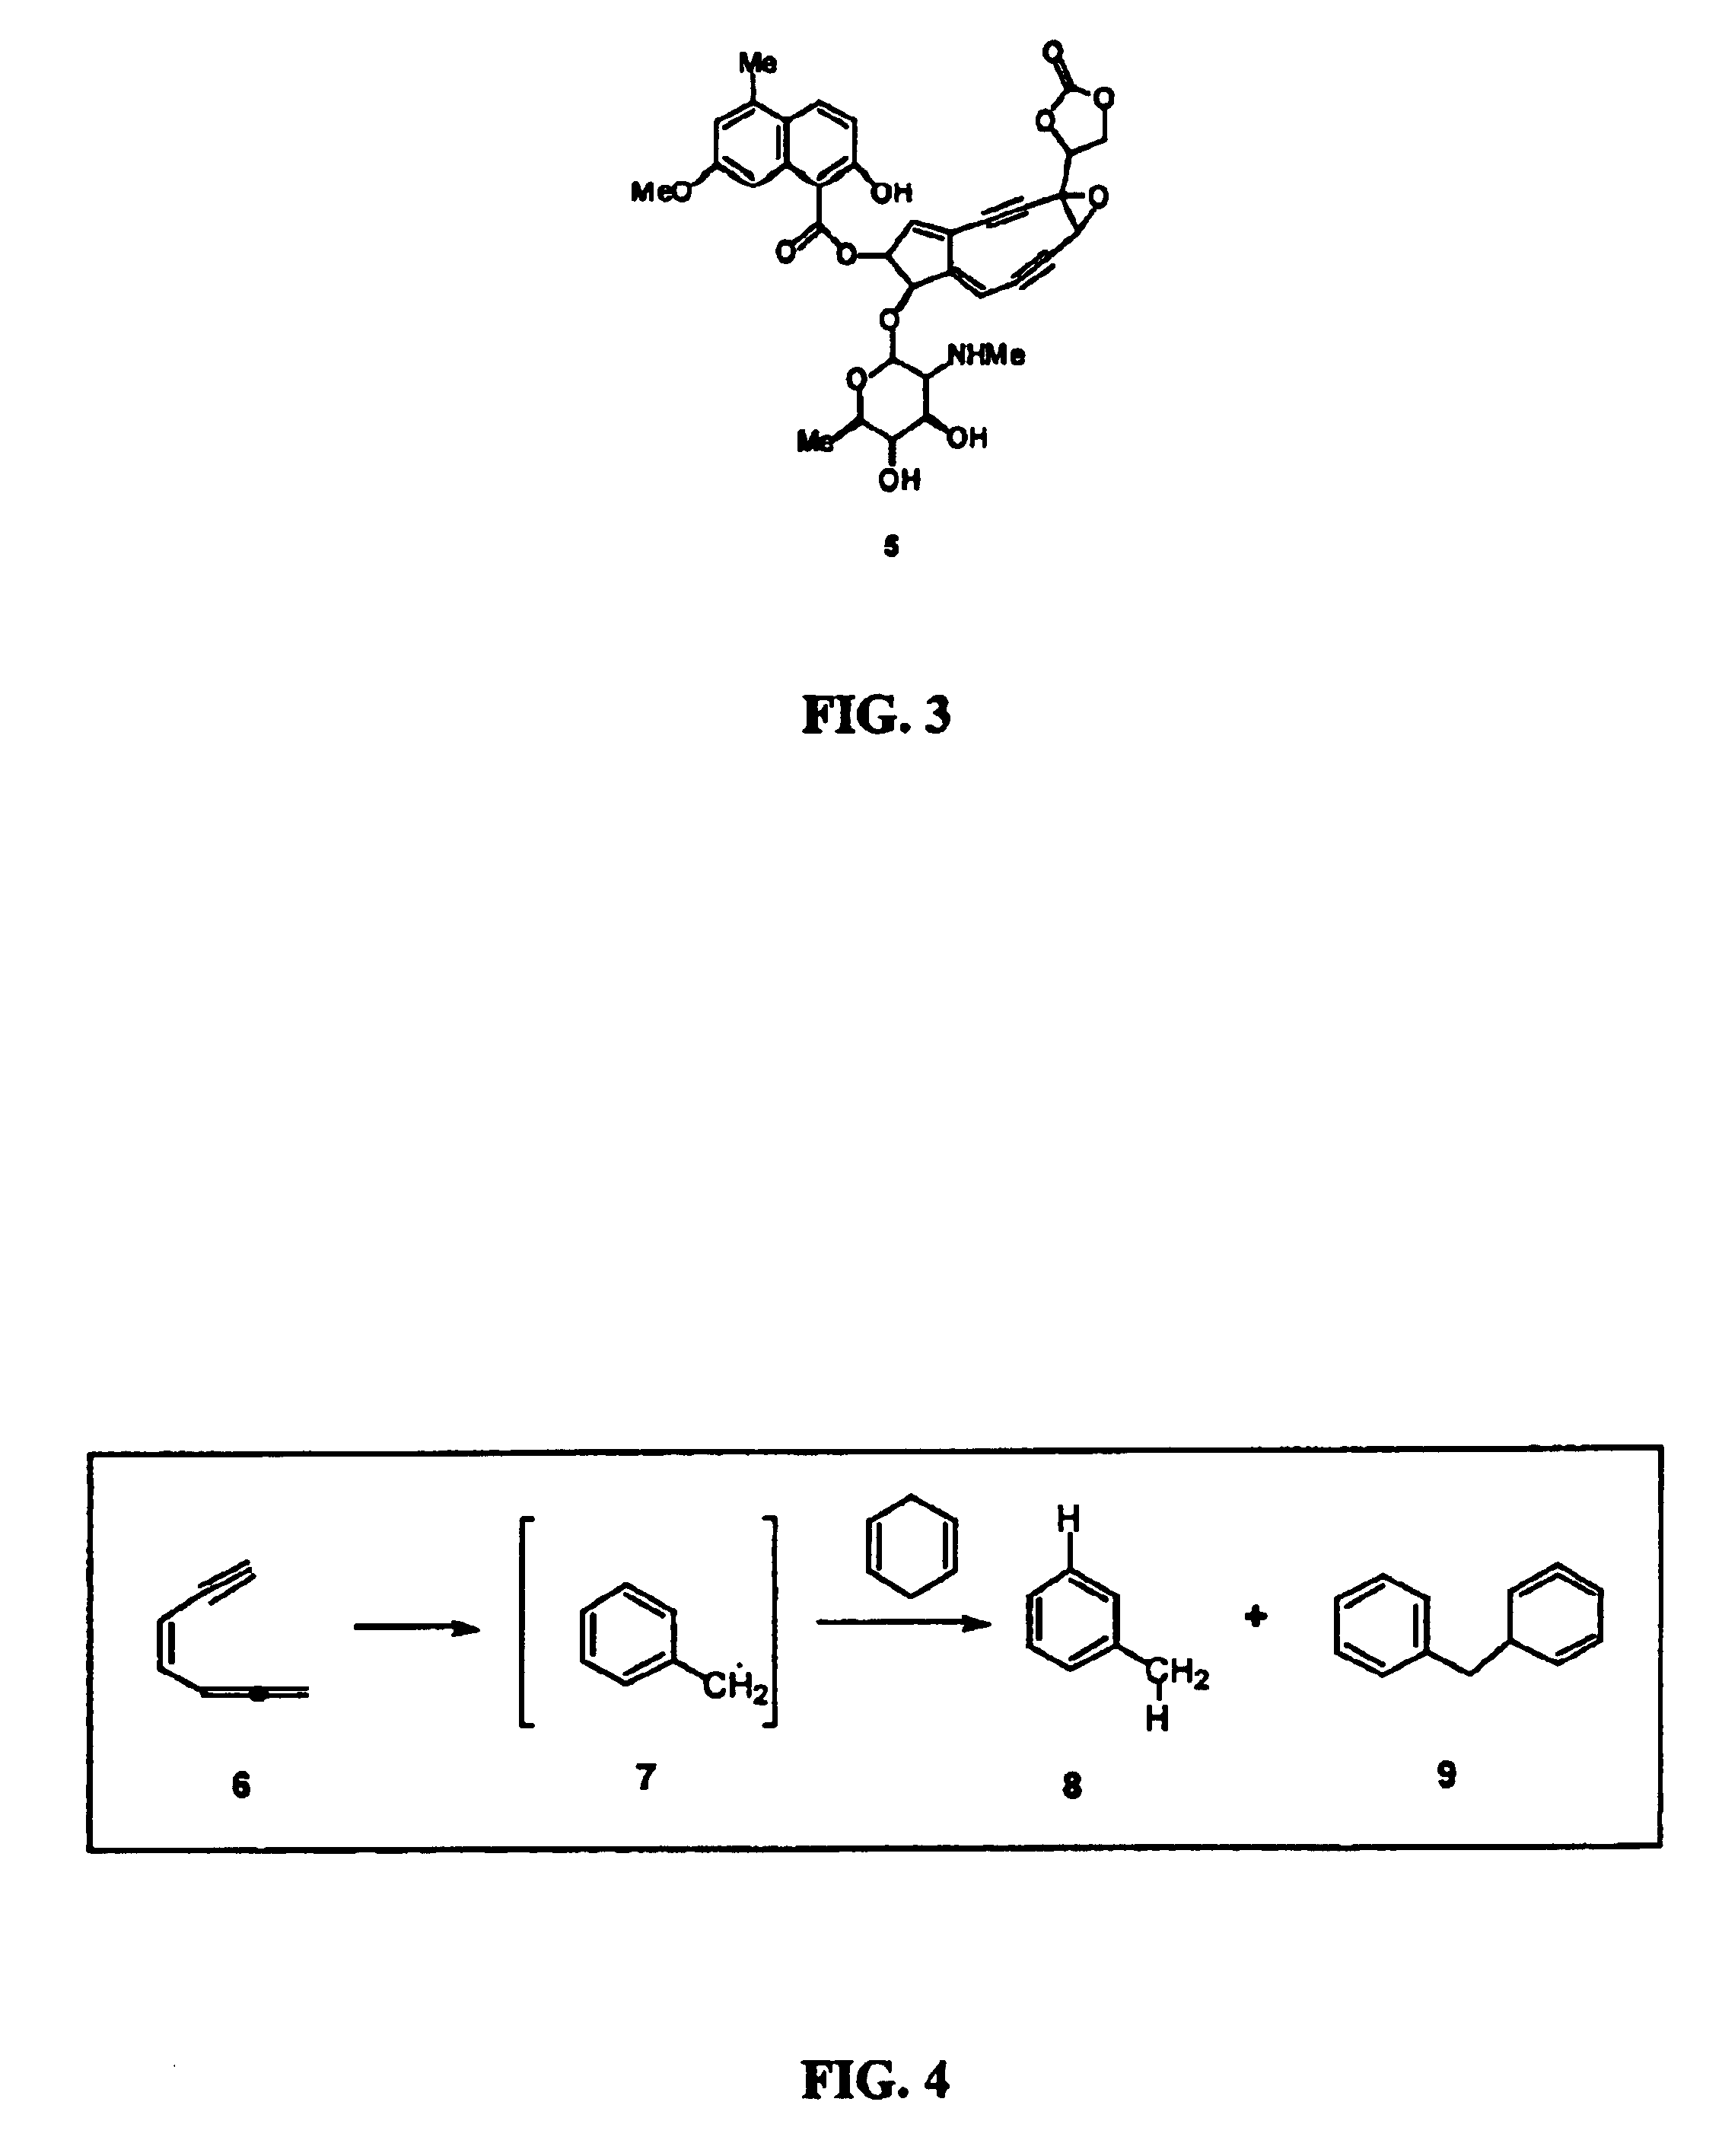 DNA-cleaving antitumor agents